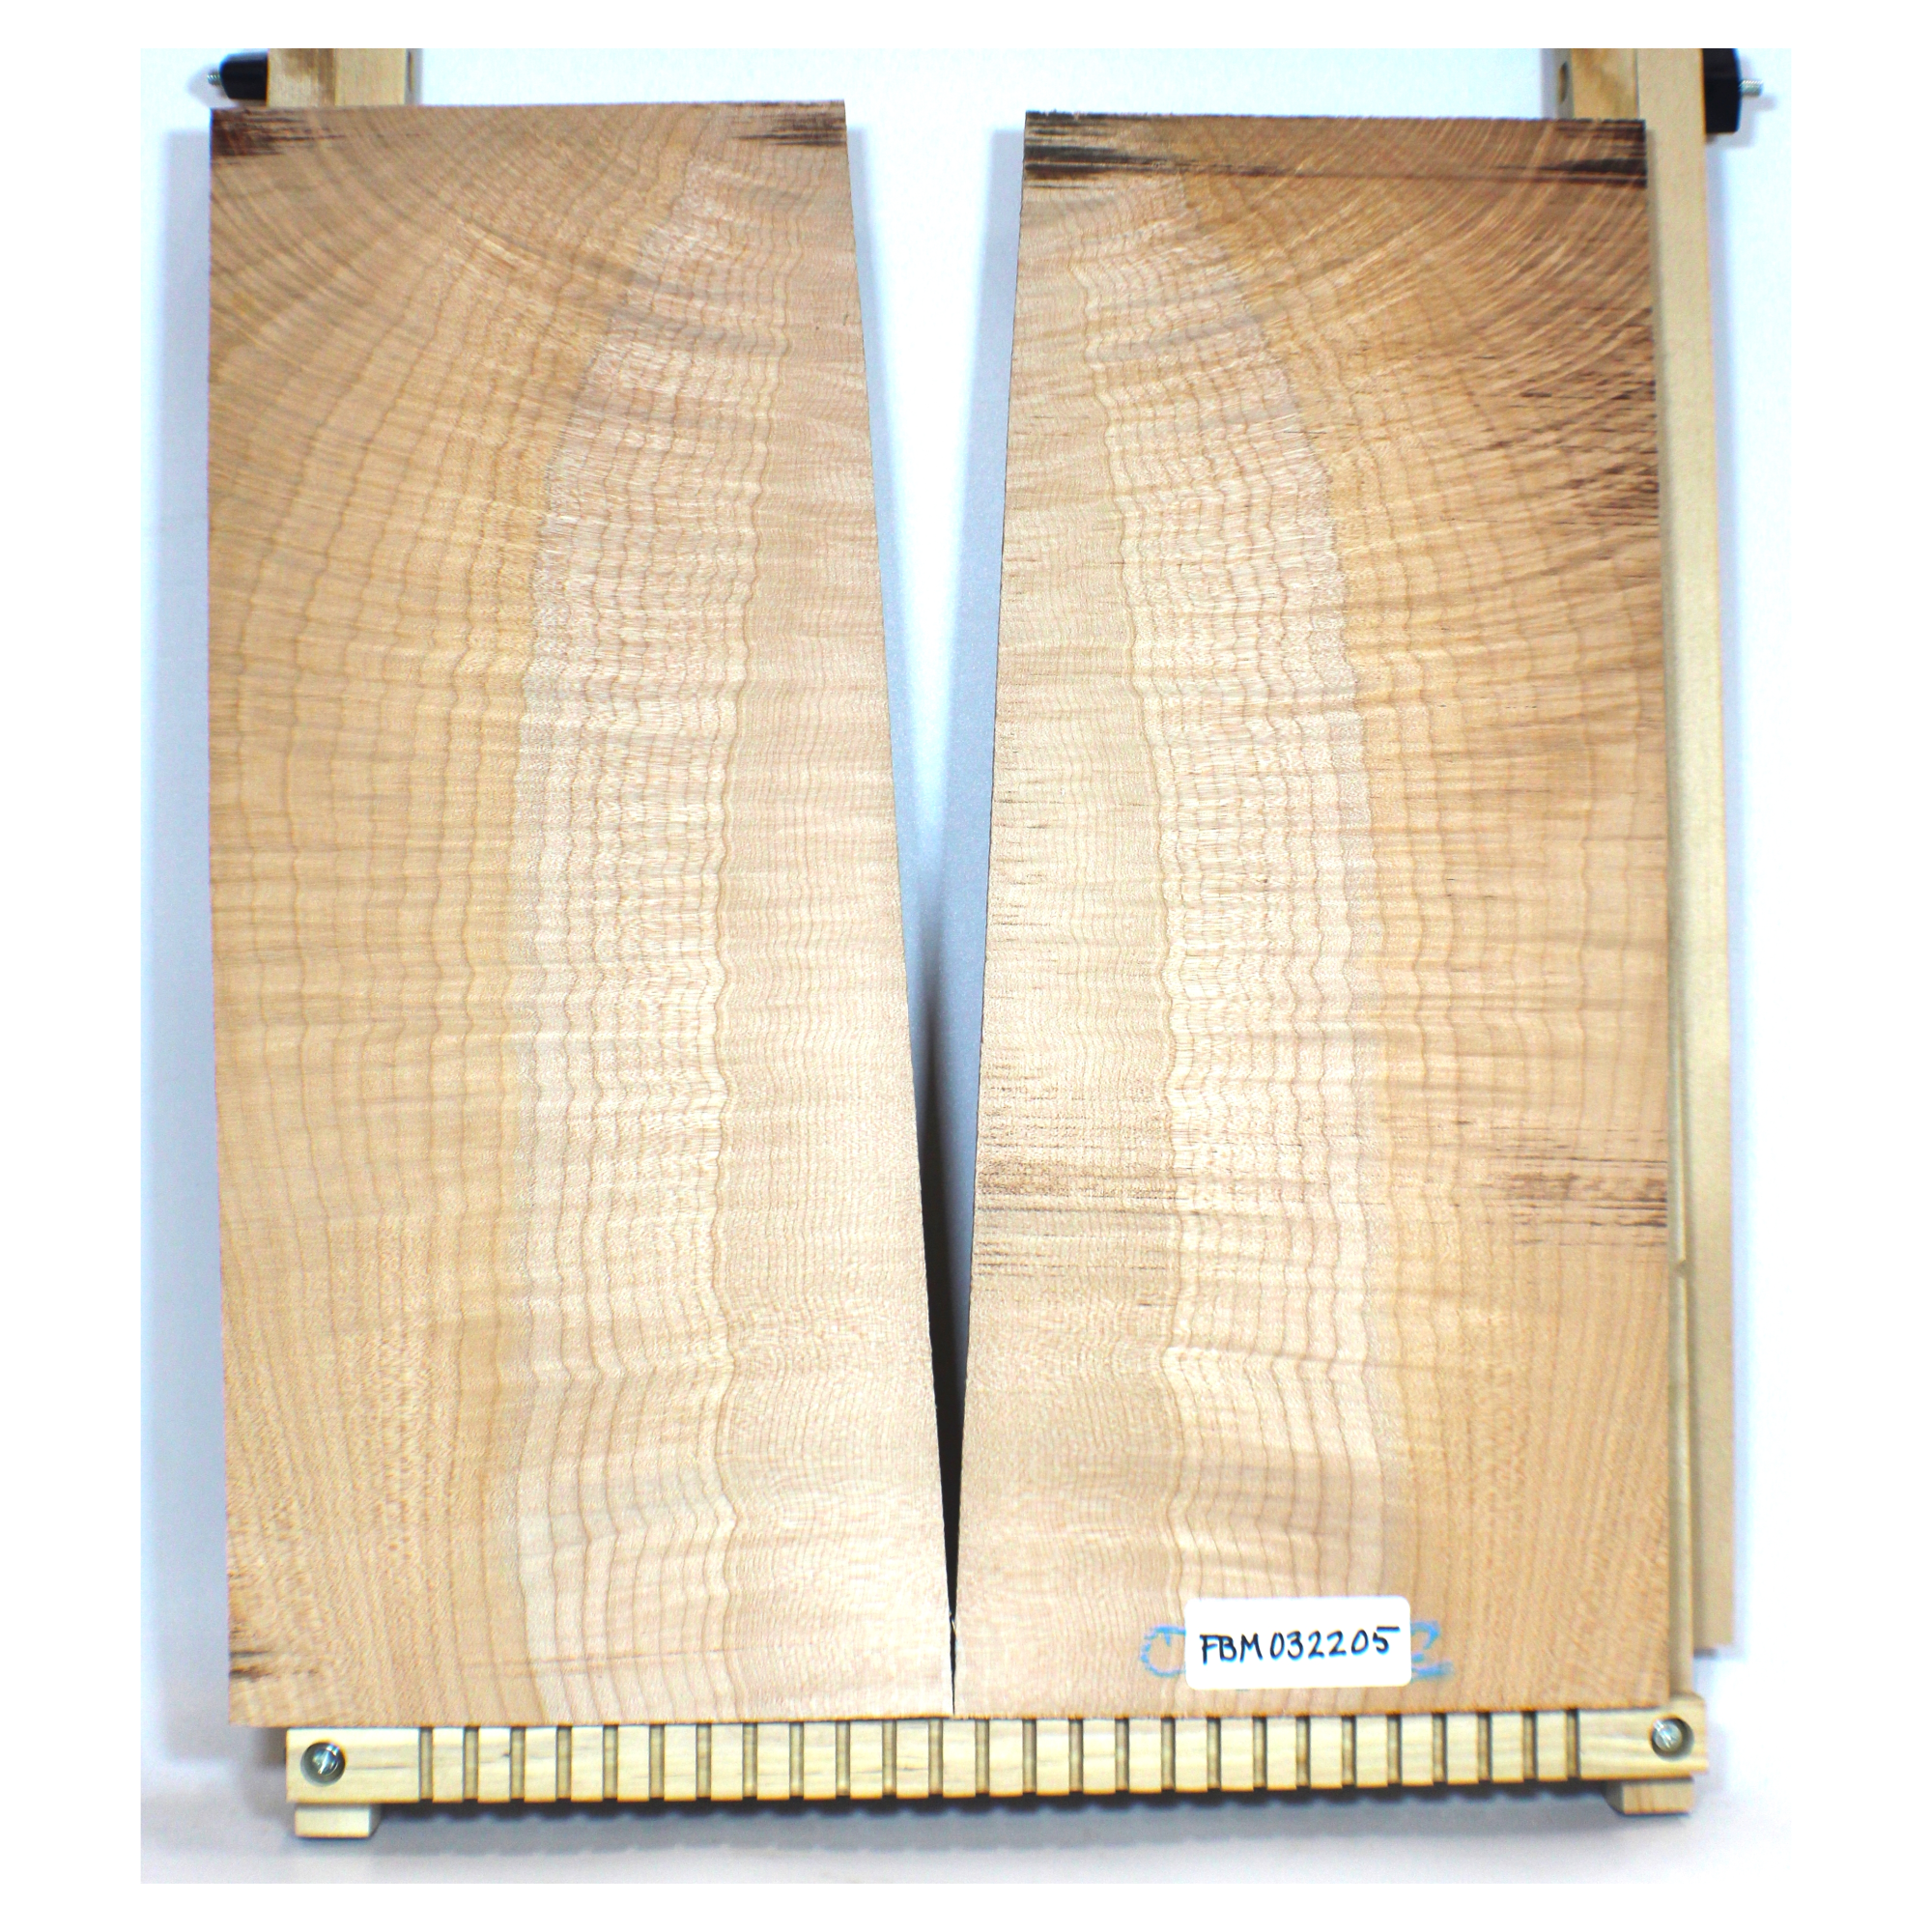 Gorgeous 5A figured flame maple book-matched set with two-tone color. Dimensions: Thickness (each piece): .75, Width: 8